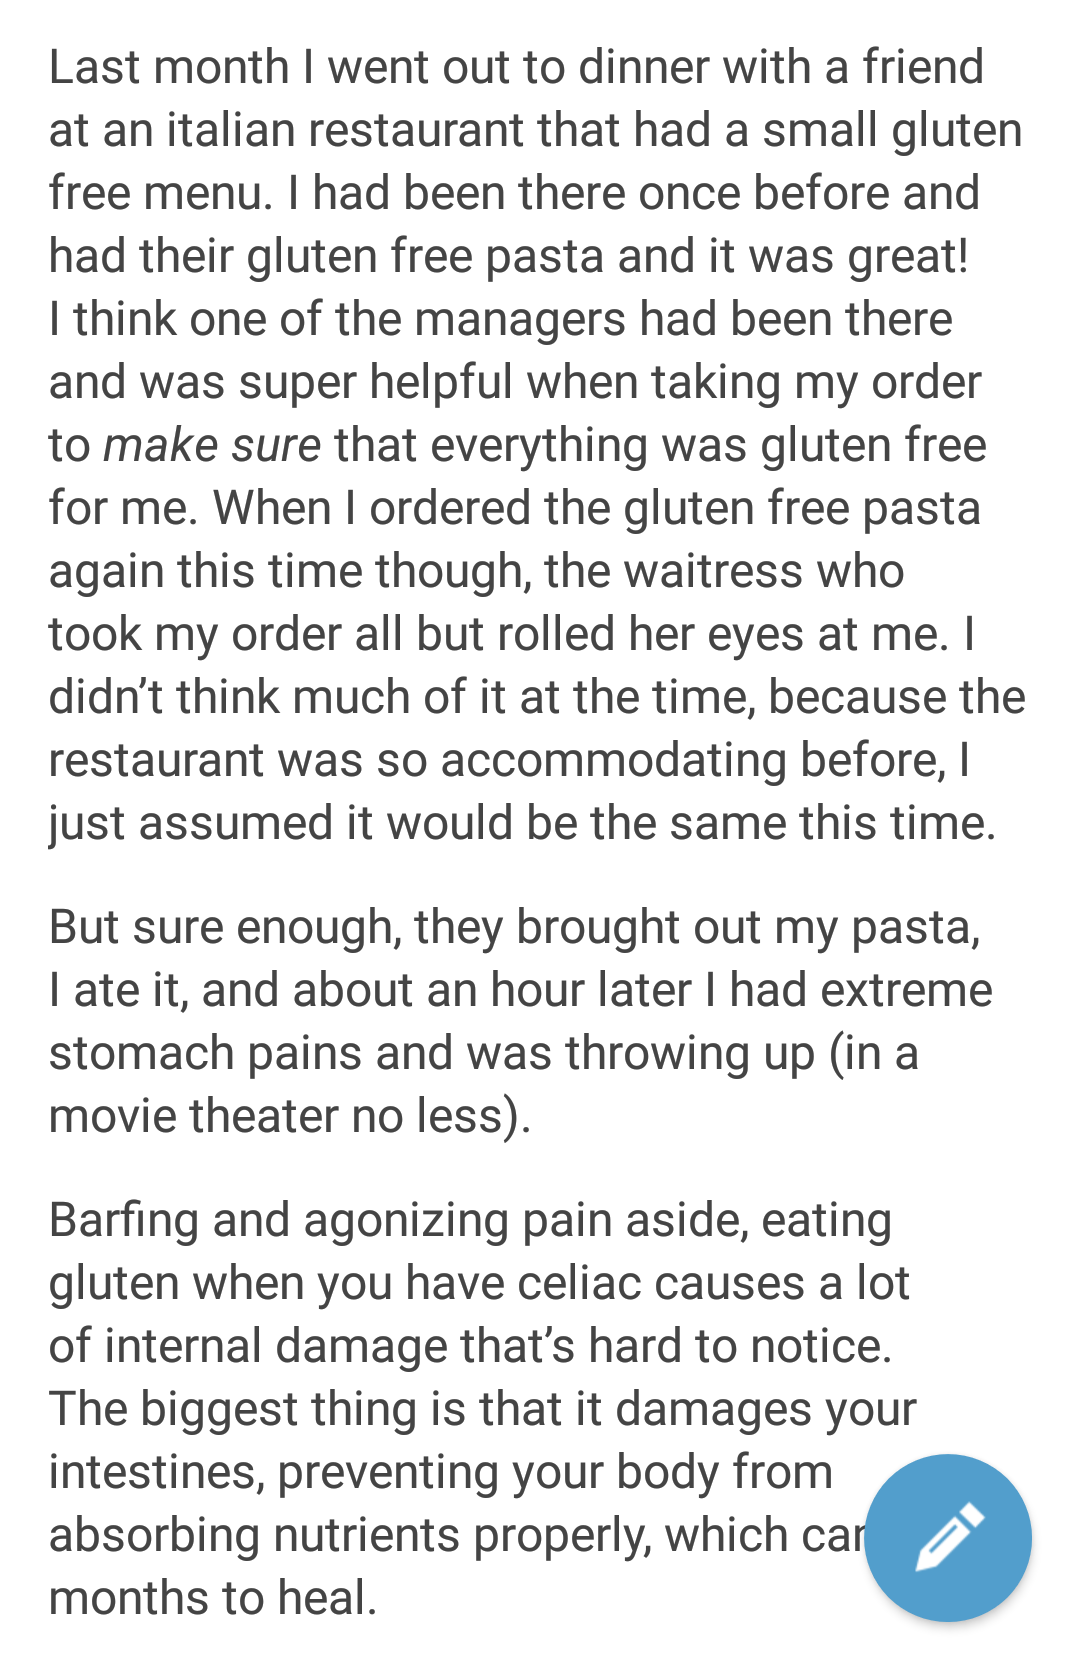 Asshole Theater Worker Tries To Impress With Their Stupidity